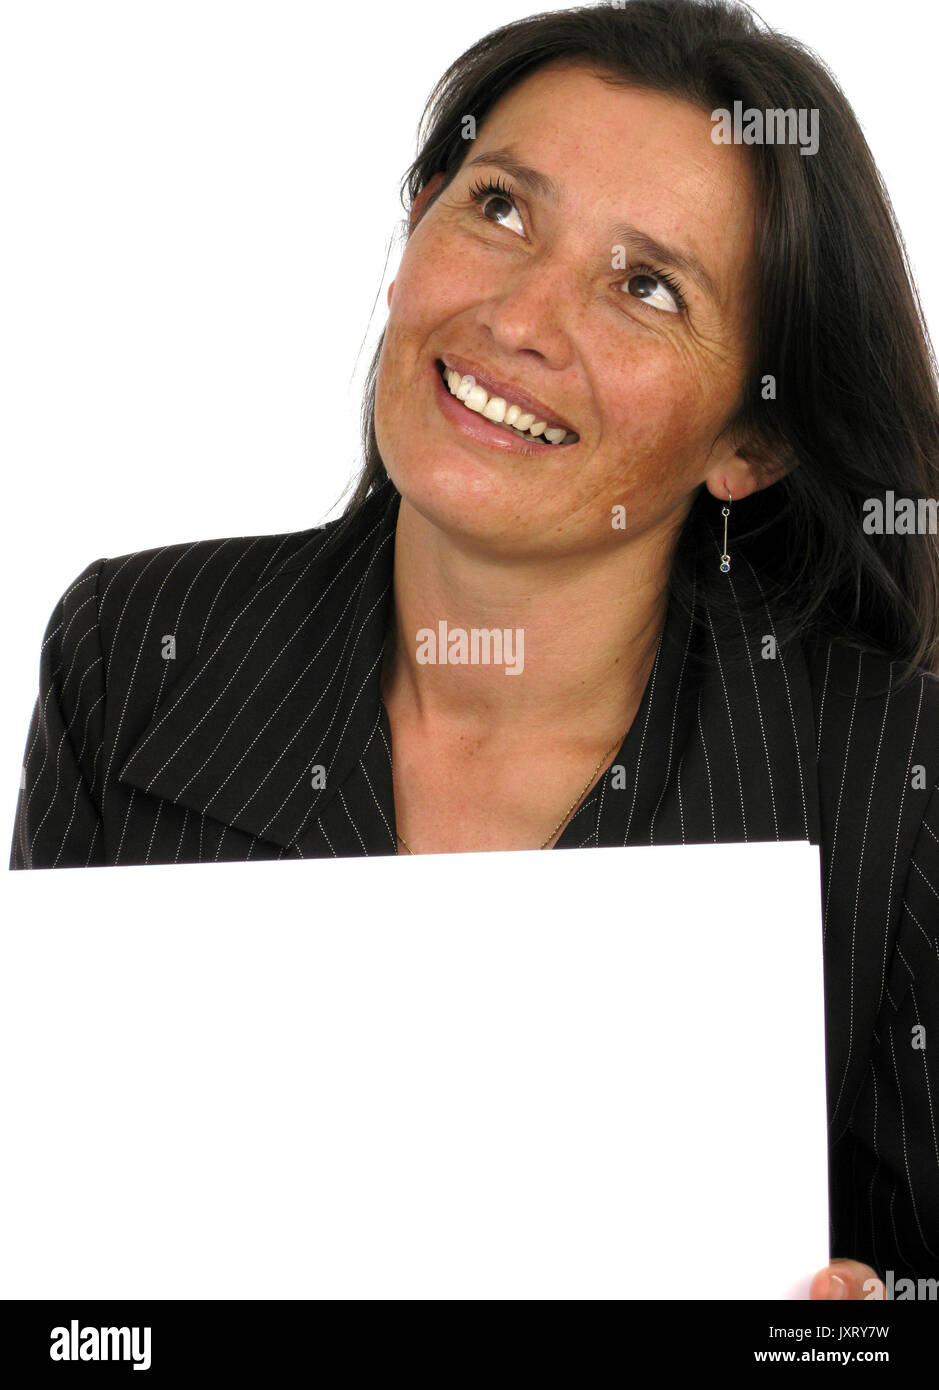 Girl smiling, thinking and holding a banner add isolated over a white background Stock Photo